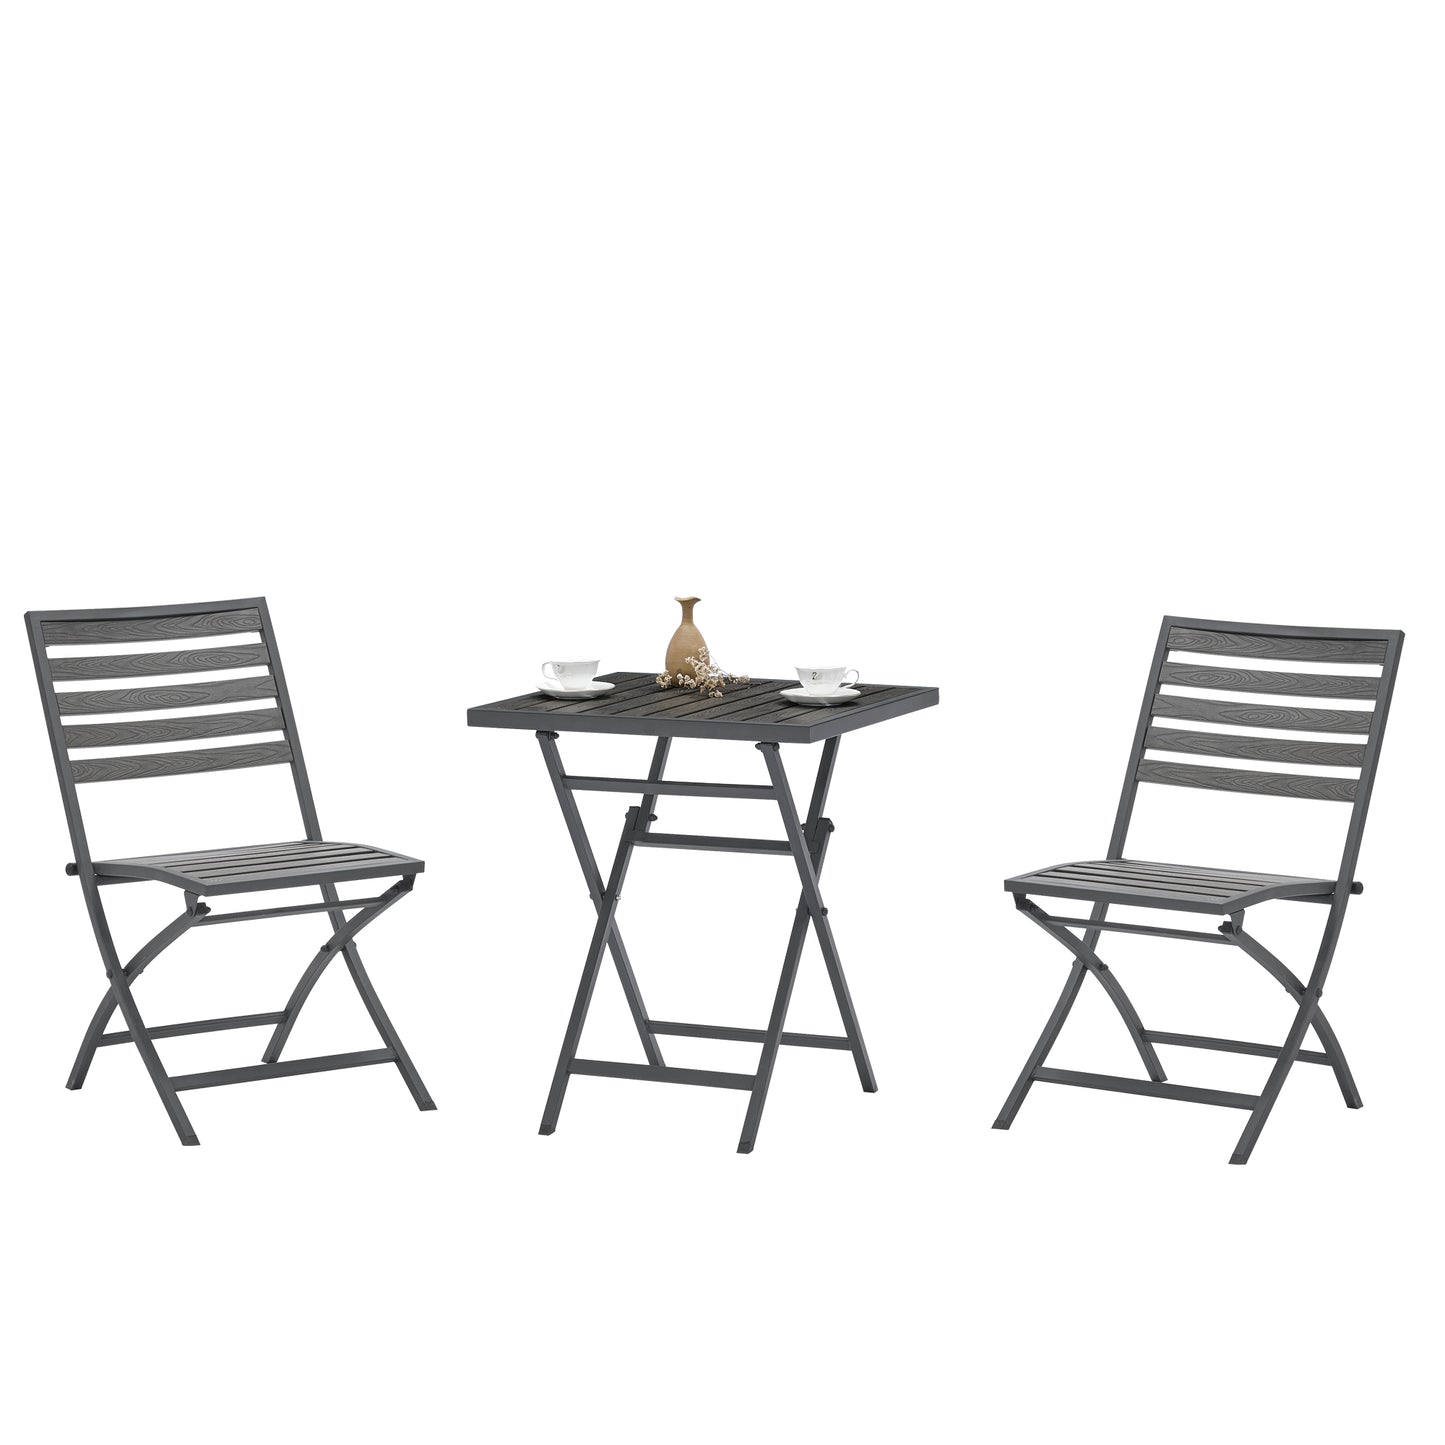 3-Piece All-Weather Folding Table and Chair Plastic Wood Outdoor